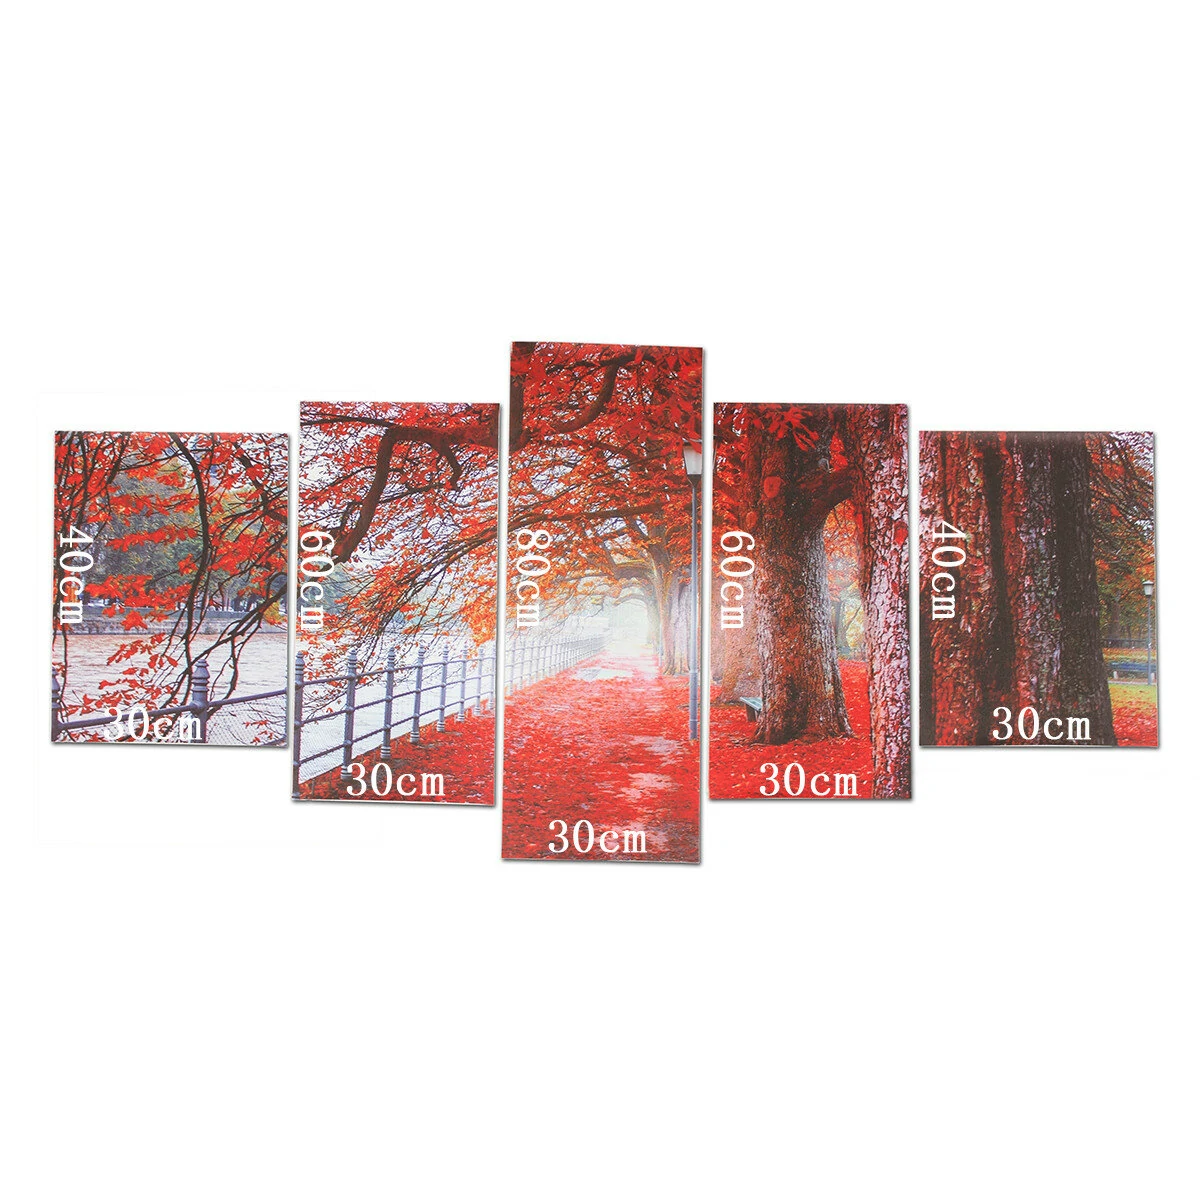 5pcs red falling leaves canvas painting autumn tree wall decorative print art pictures unframed wall hanging home office decorations